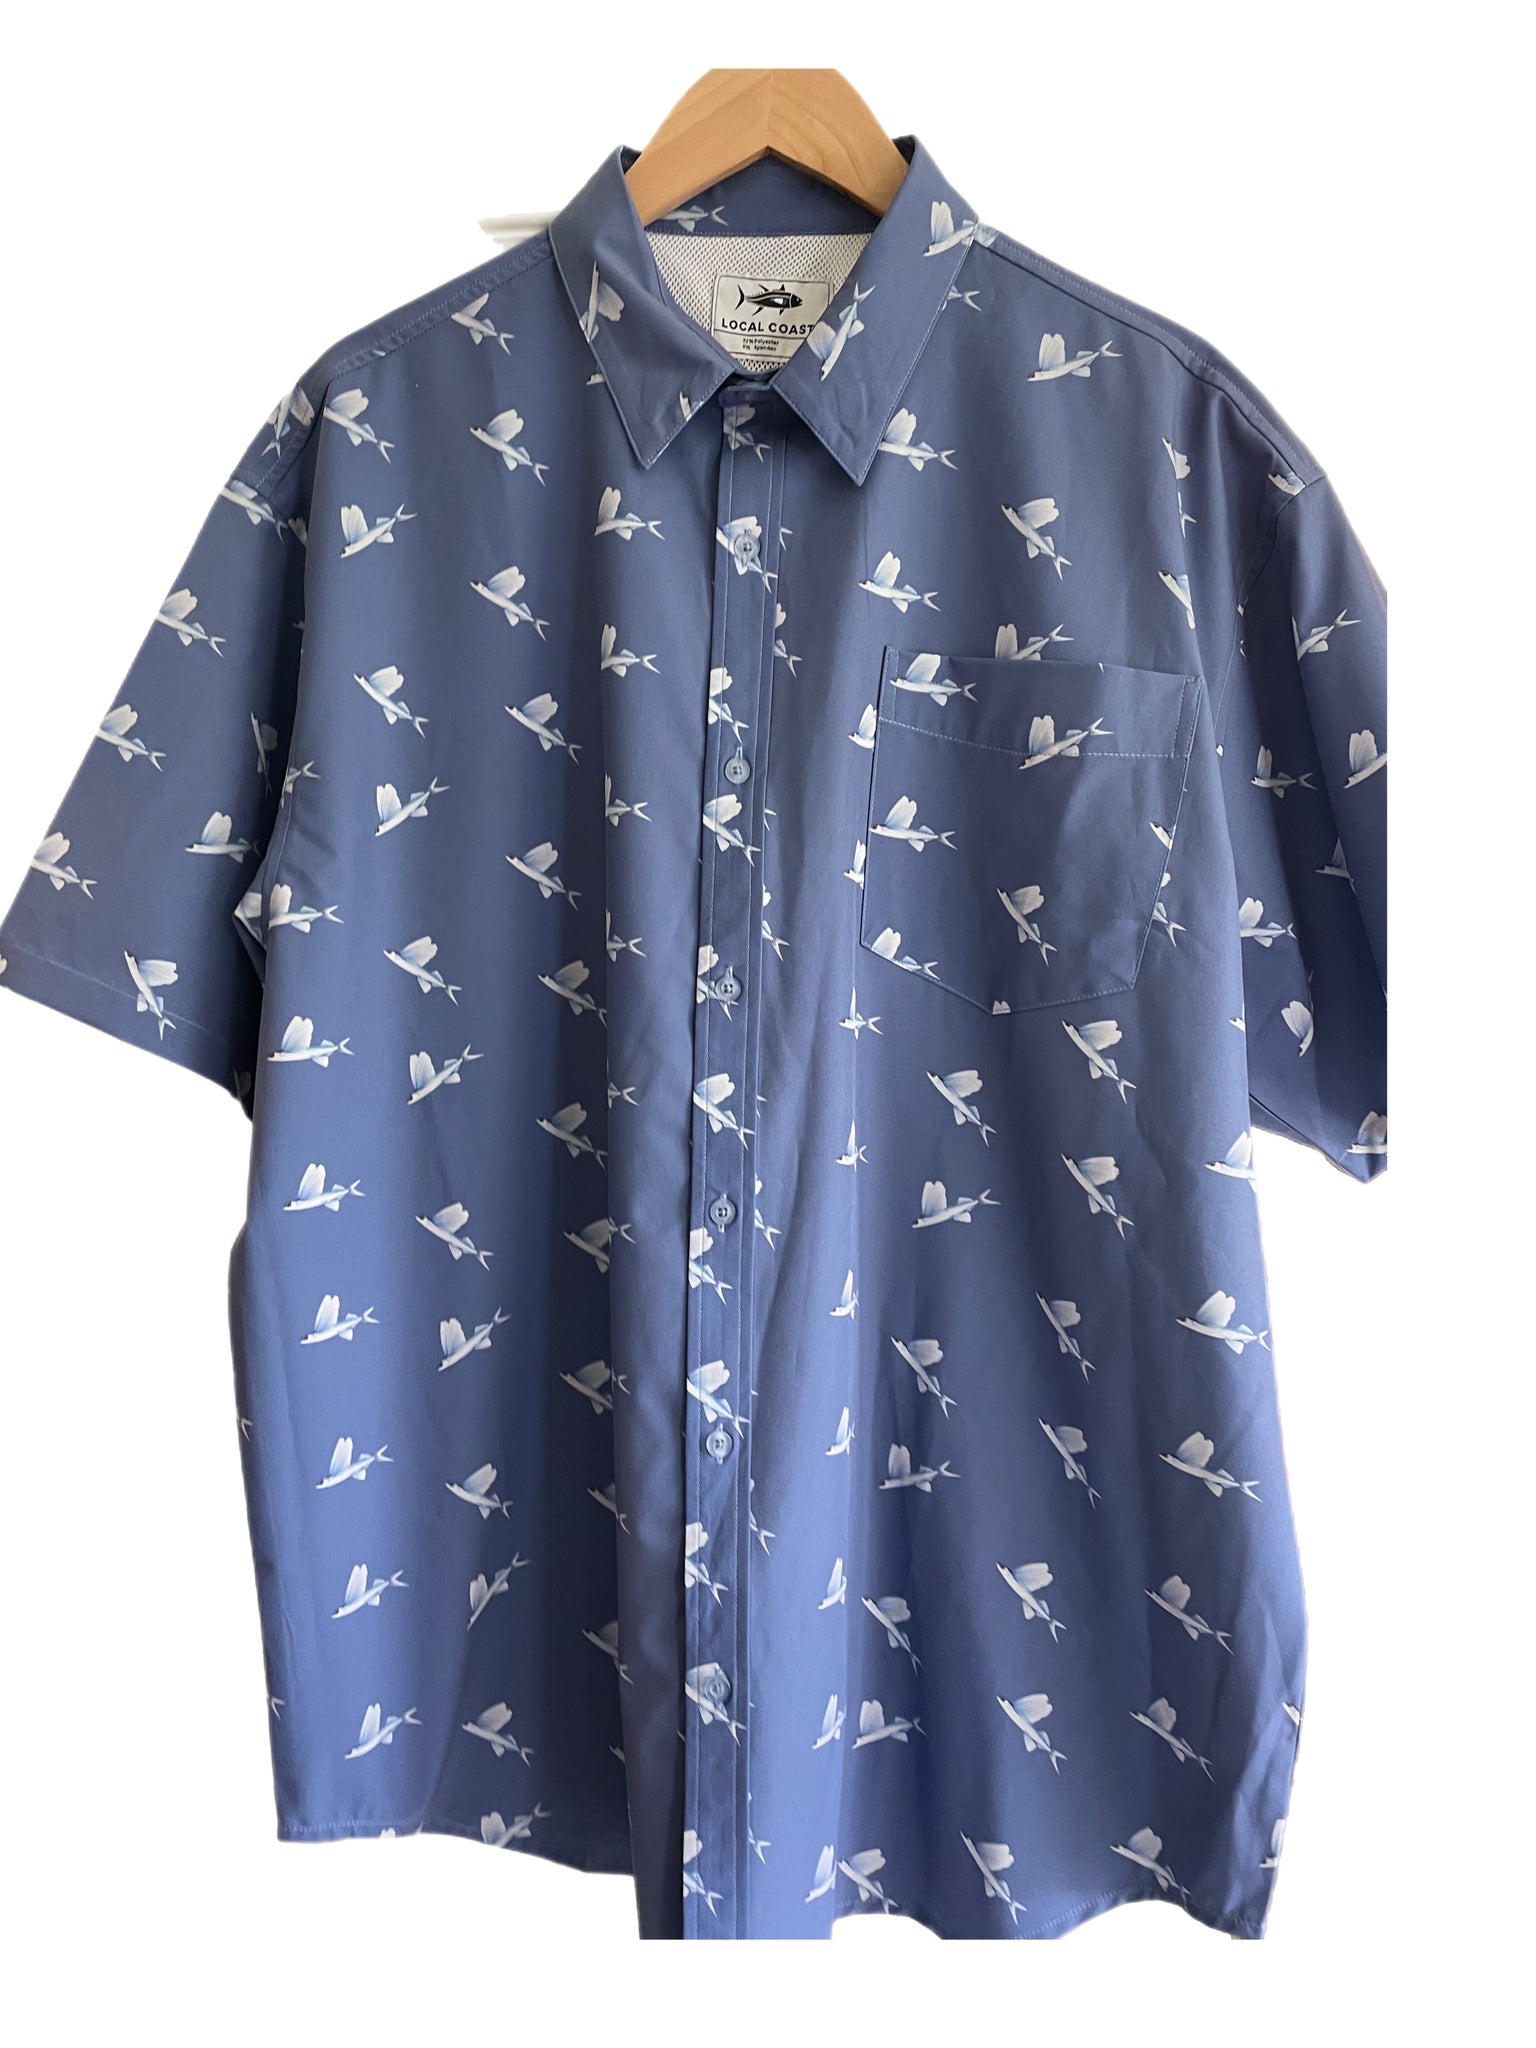 Flying Fish Performance Button Down